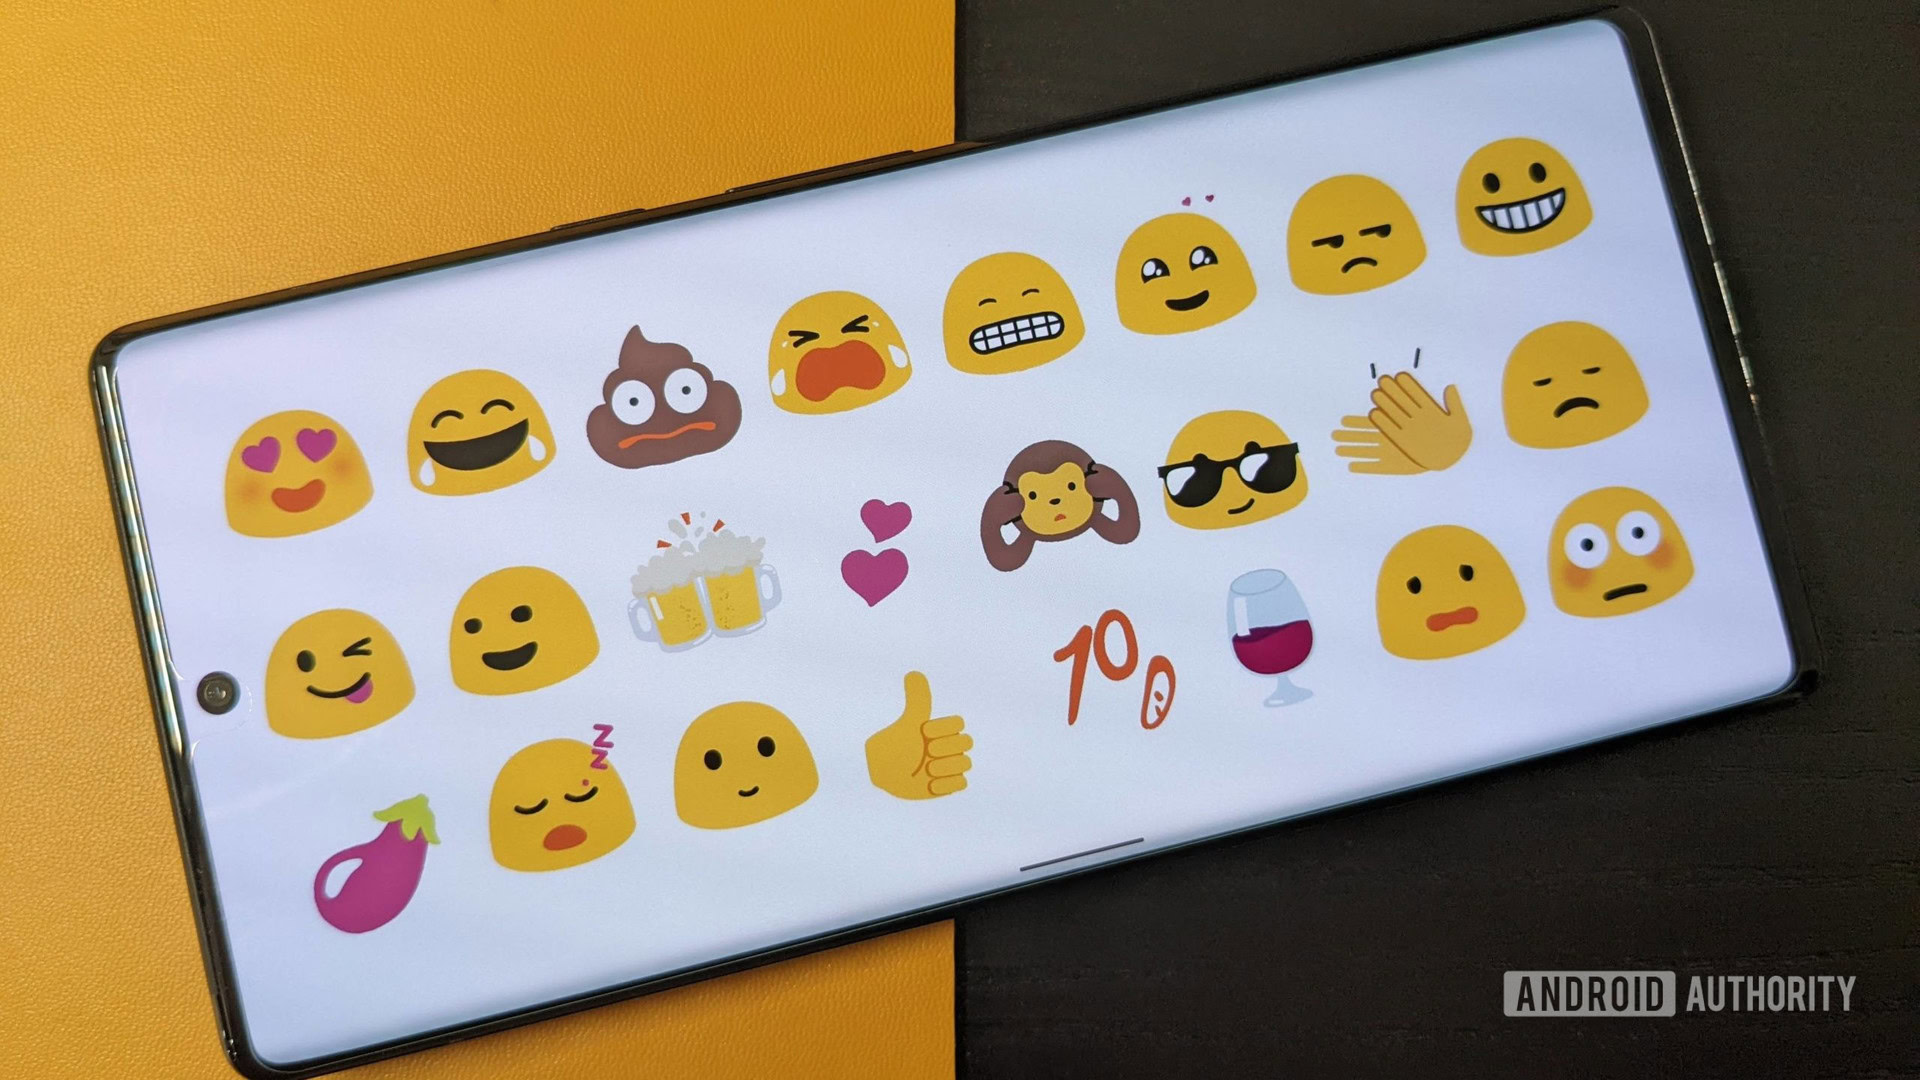 Blob emoji sticker pack on a Pixel 6 with a yellow and black background